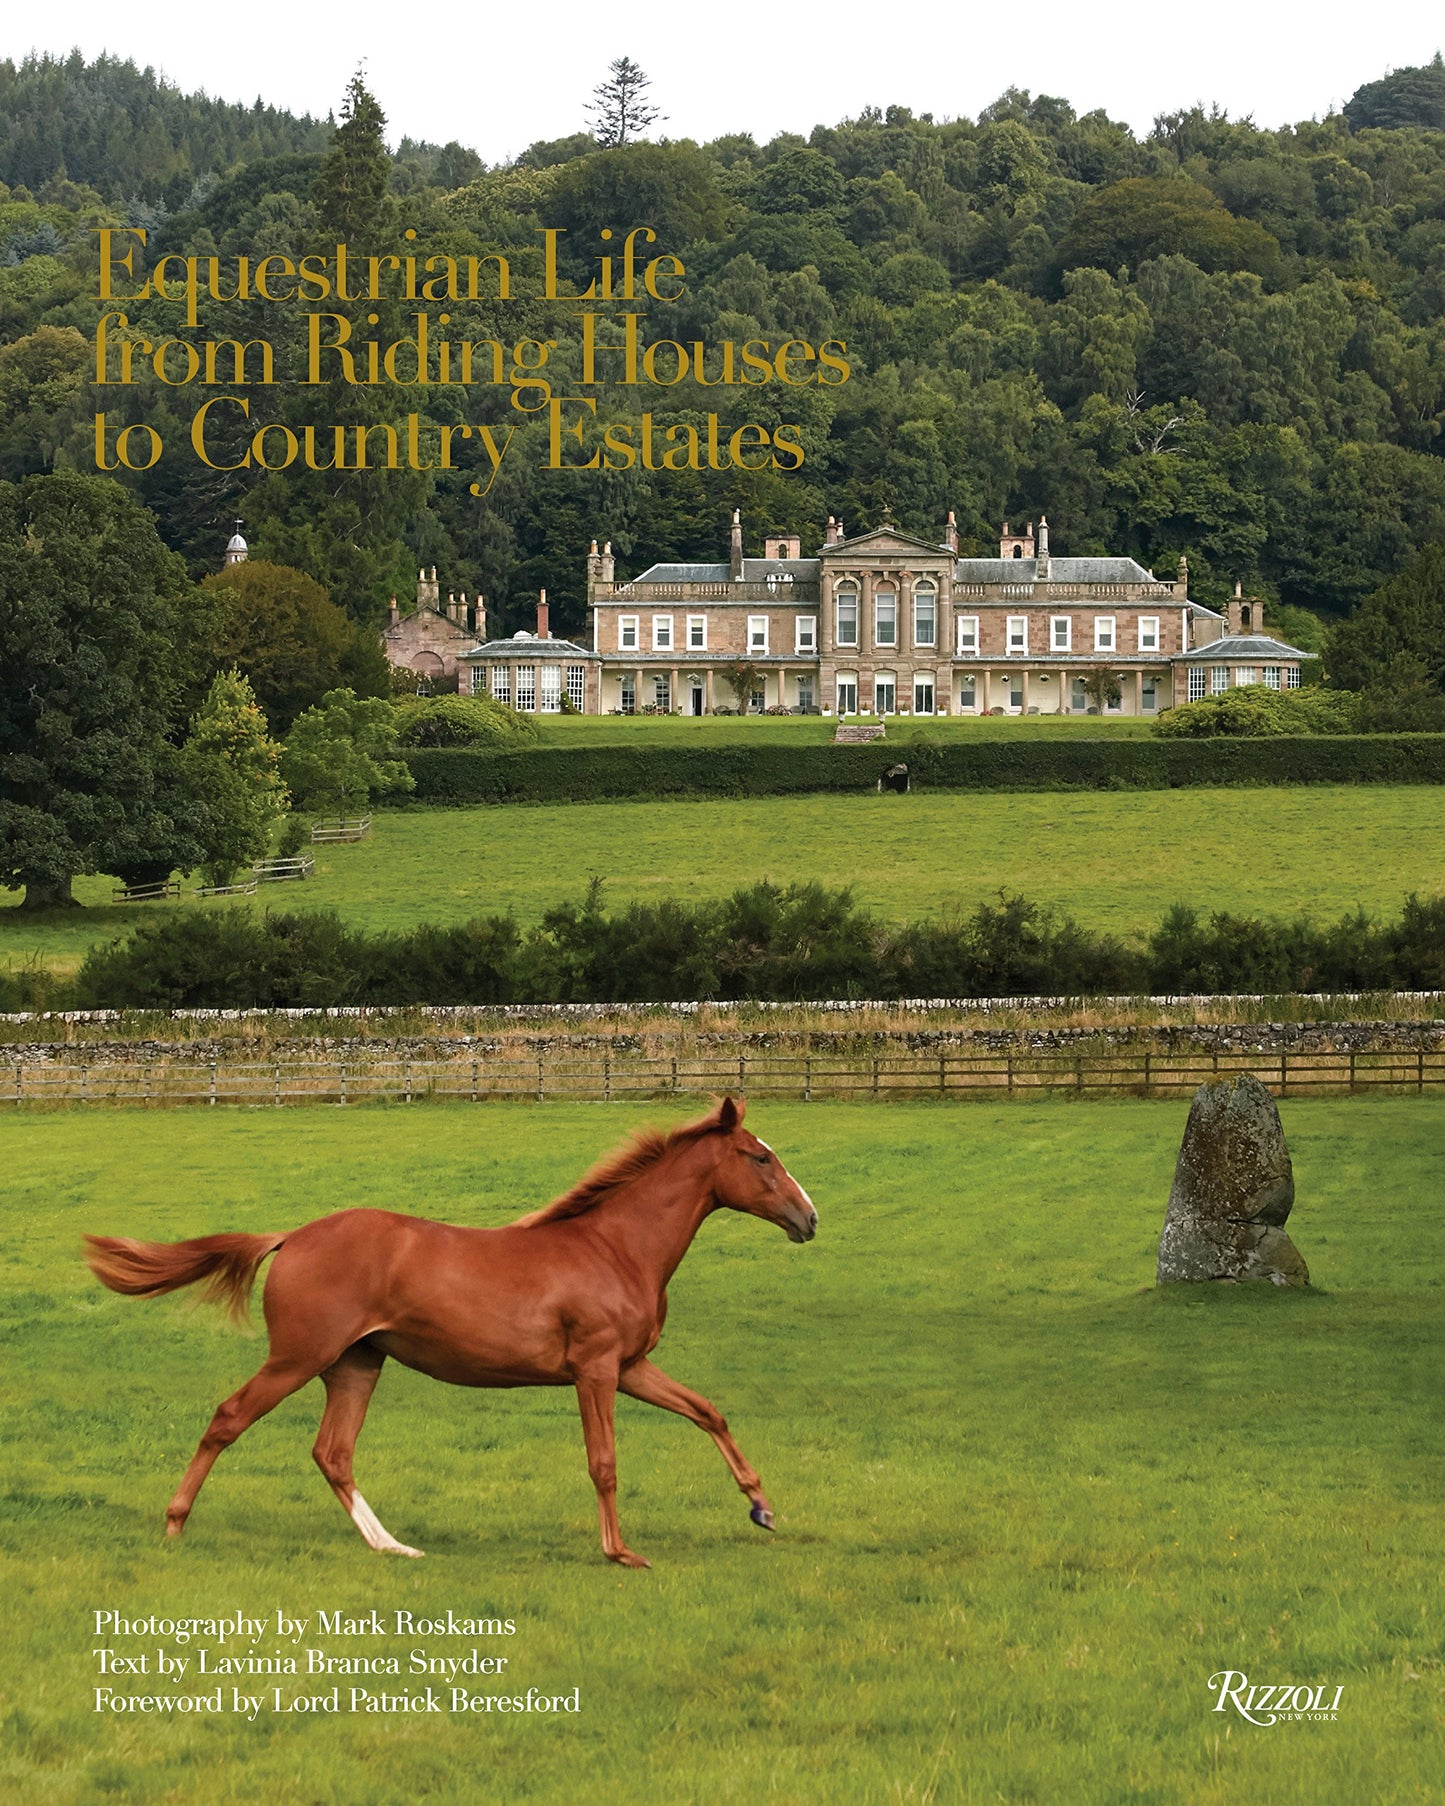 Equestrian Life: From Riding Houses to Country Estates